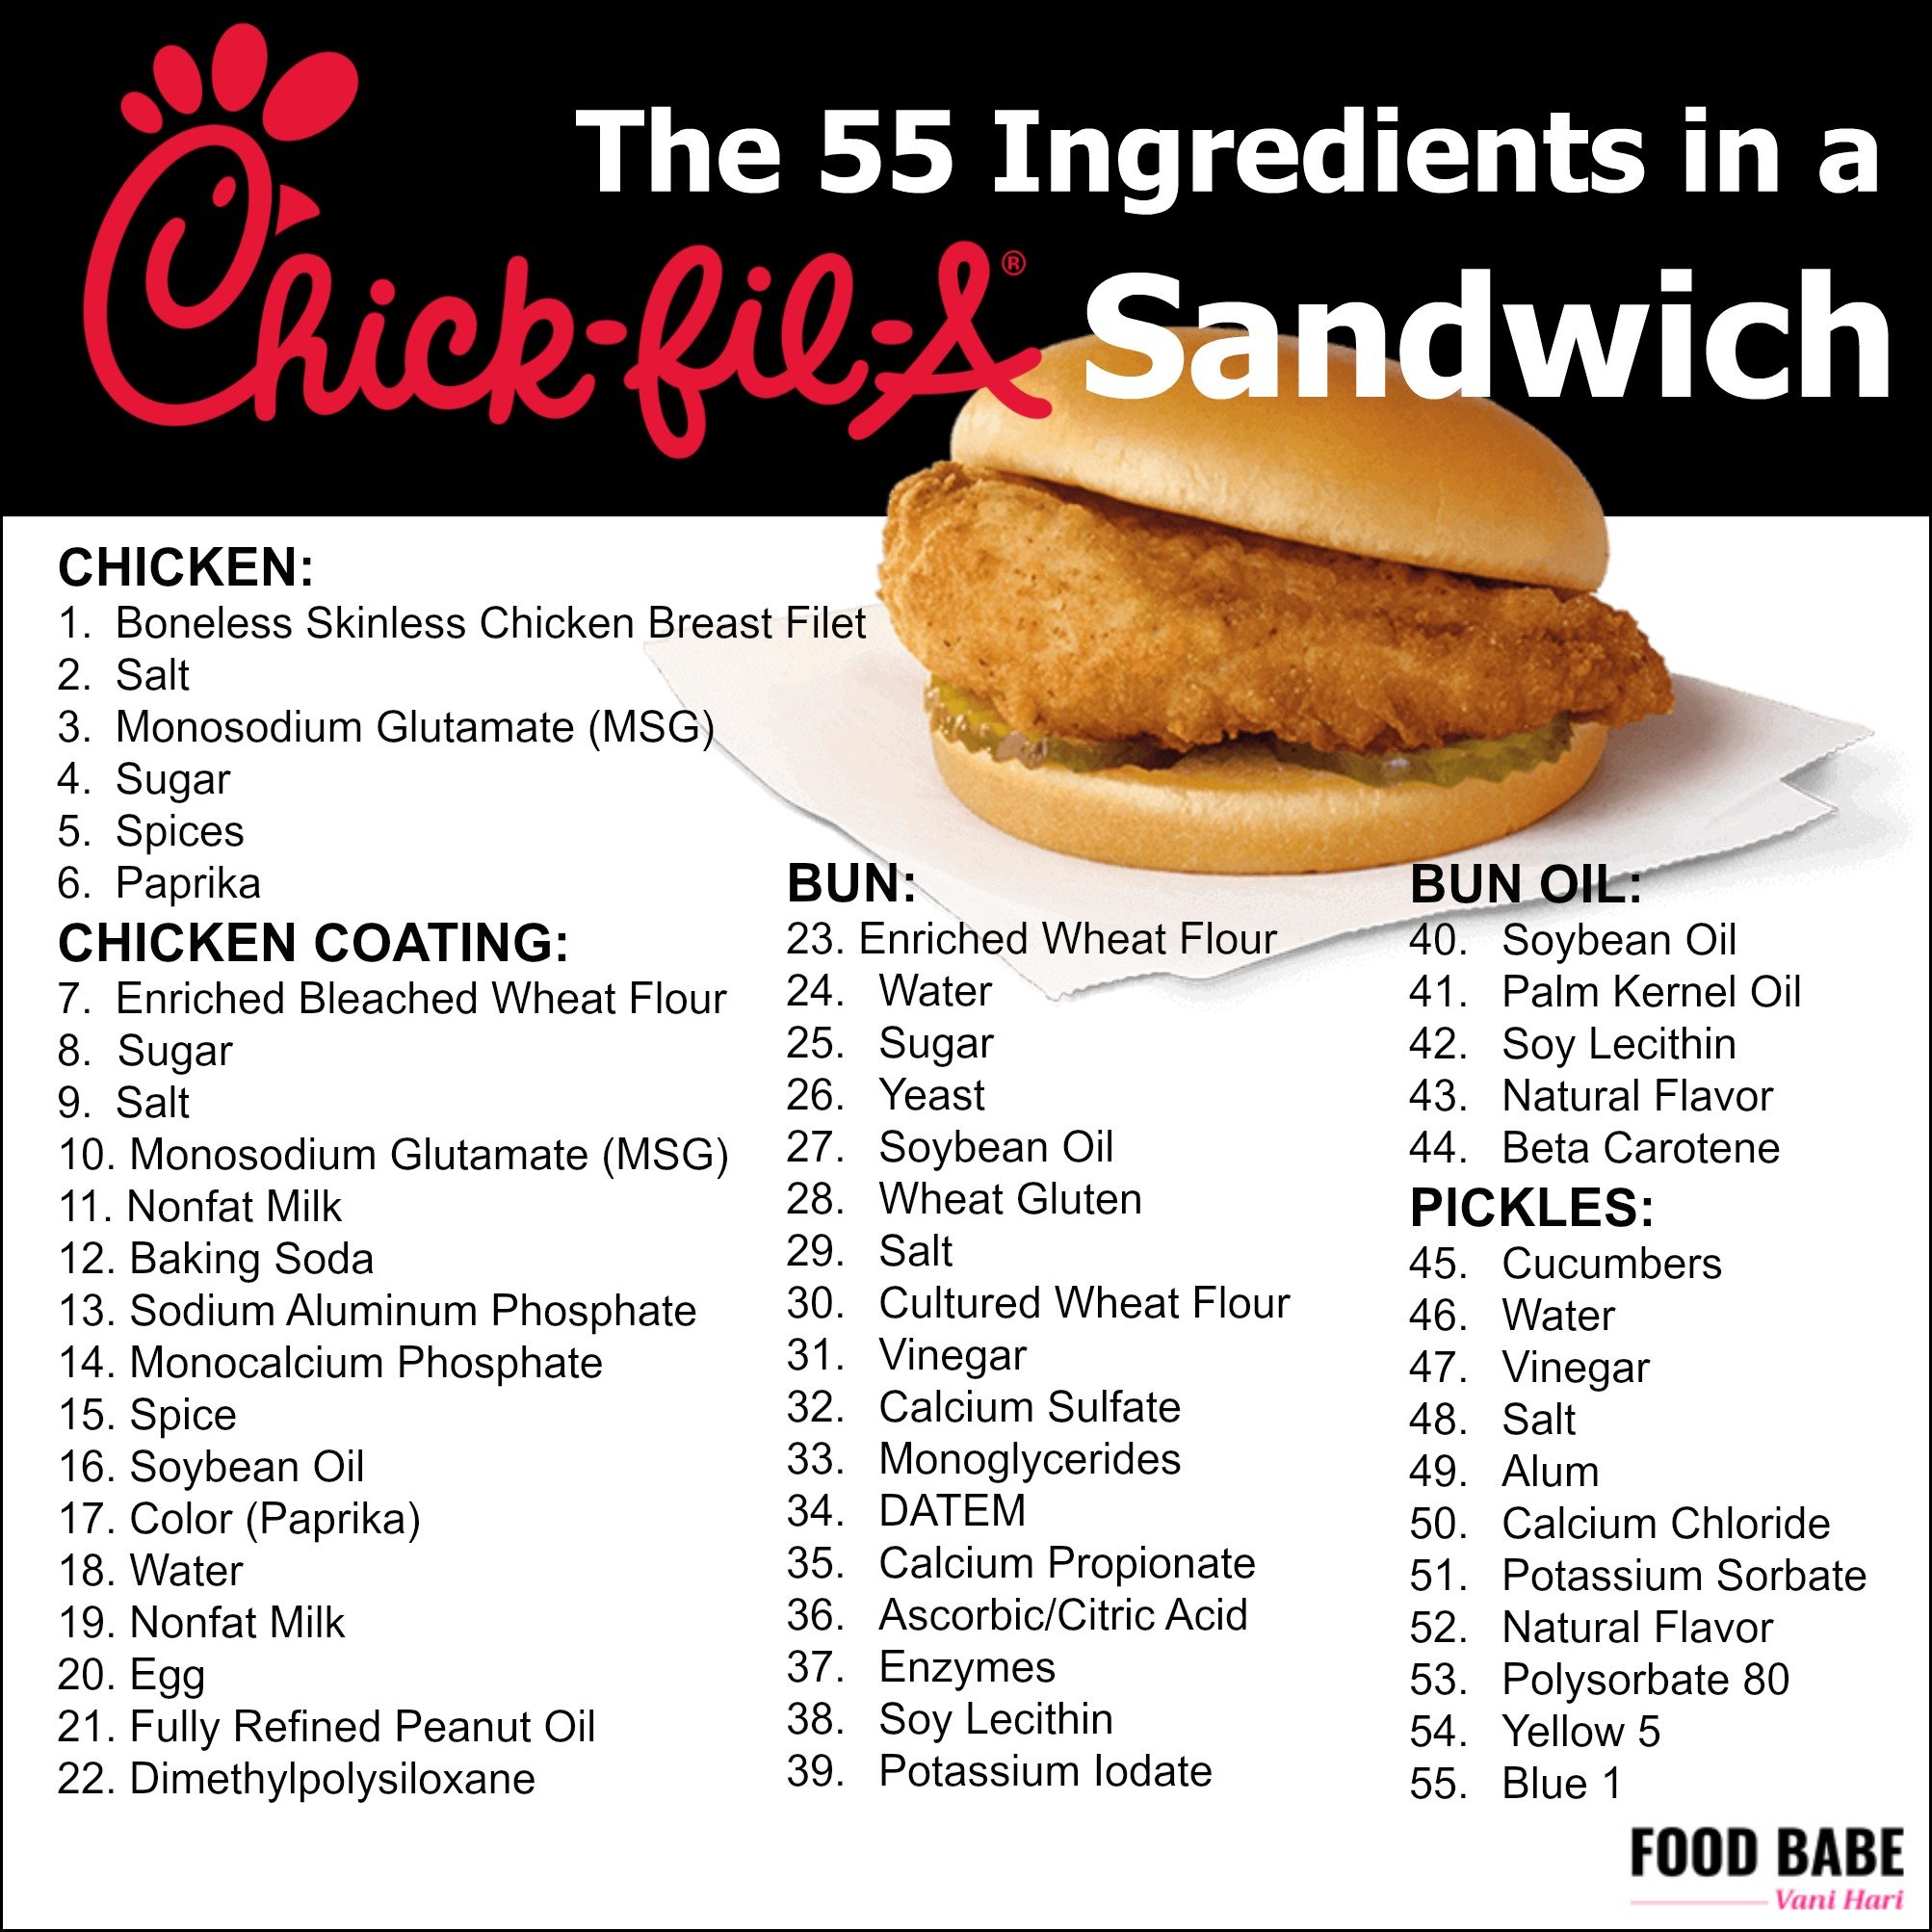 How many chickens does chick fil a use a day Here Are The 55 Ingredients In A Chick Fil A Sandwich Should You Eat Them